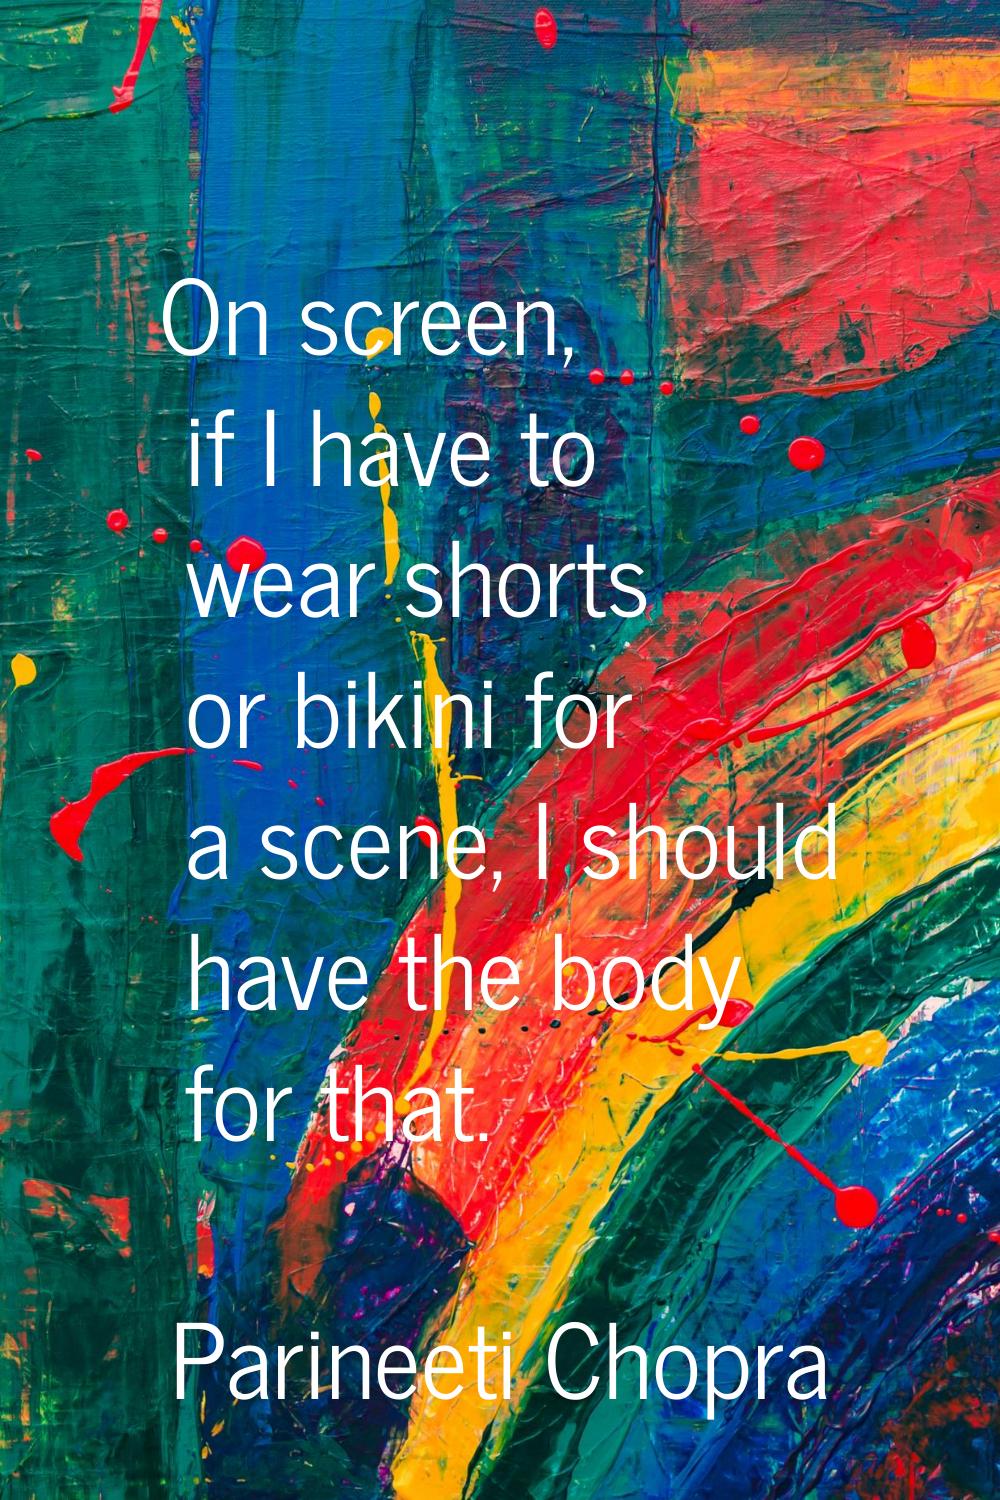 On screen, if I have to wear shorts or bikini for a scene, I should have the body for that.